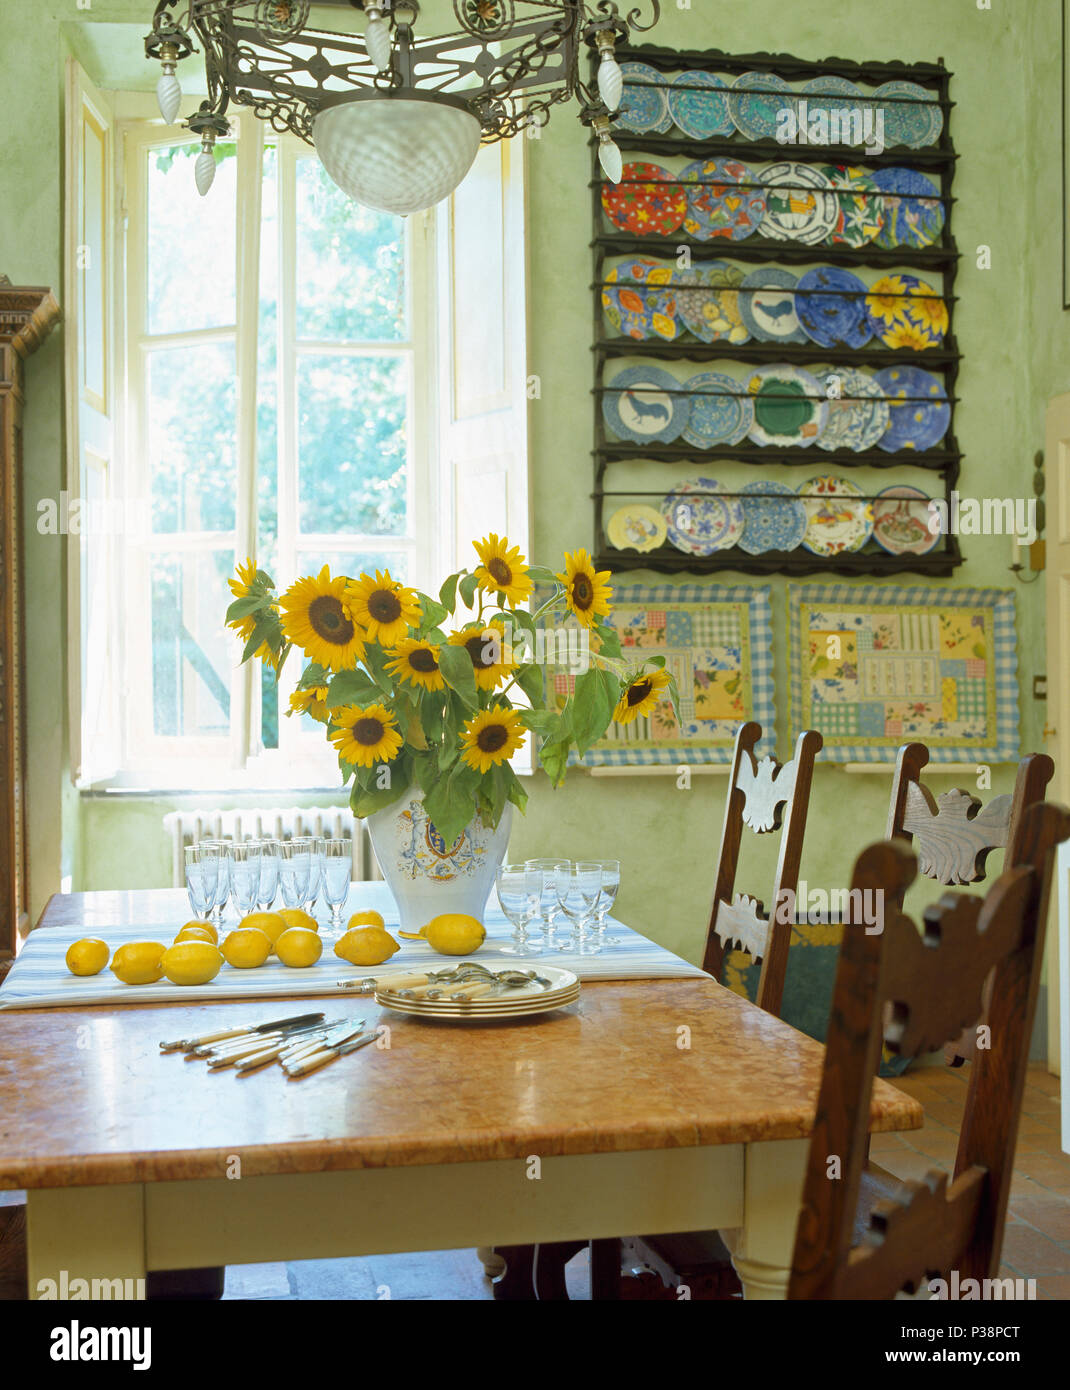 Vase Of Yellow Sunflowers On Table In Tuscan Dining Room With Colourful Pottery Plates On Wall Shelves Stock Photo Alamy